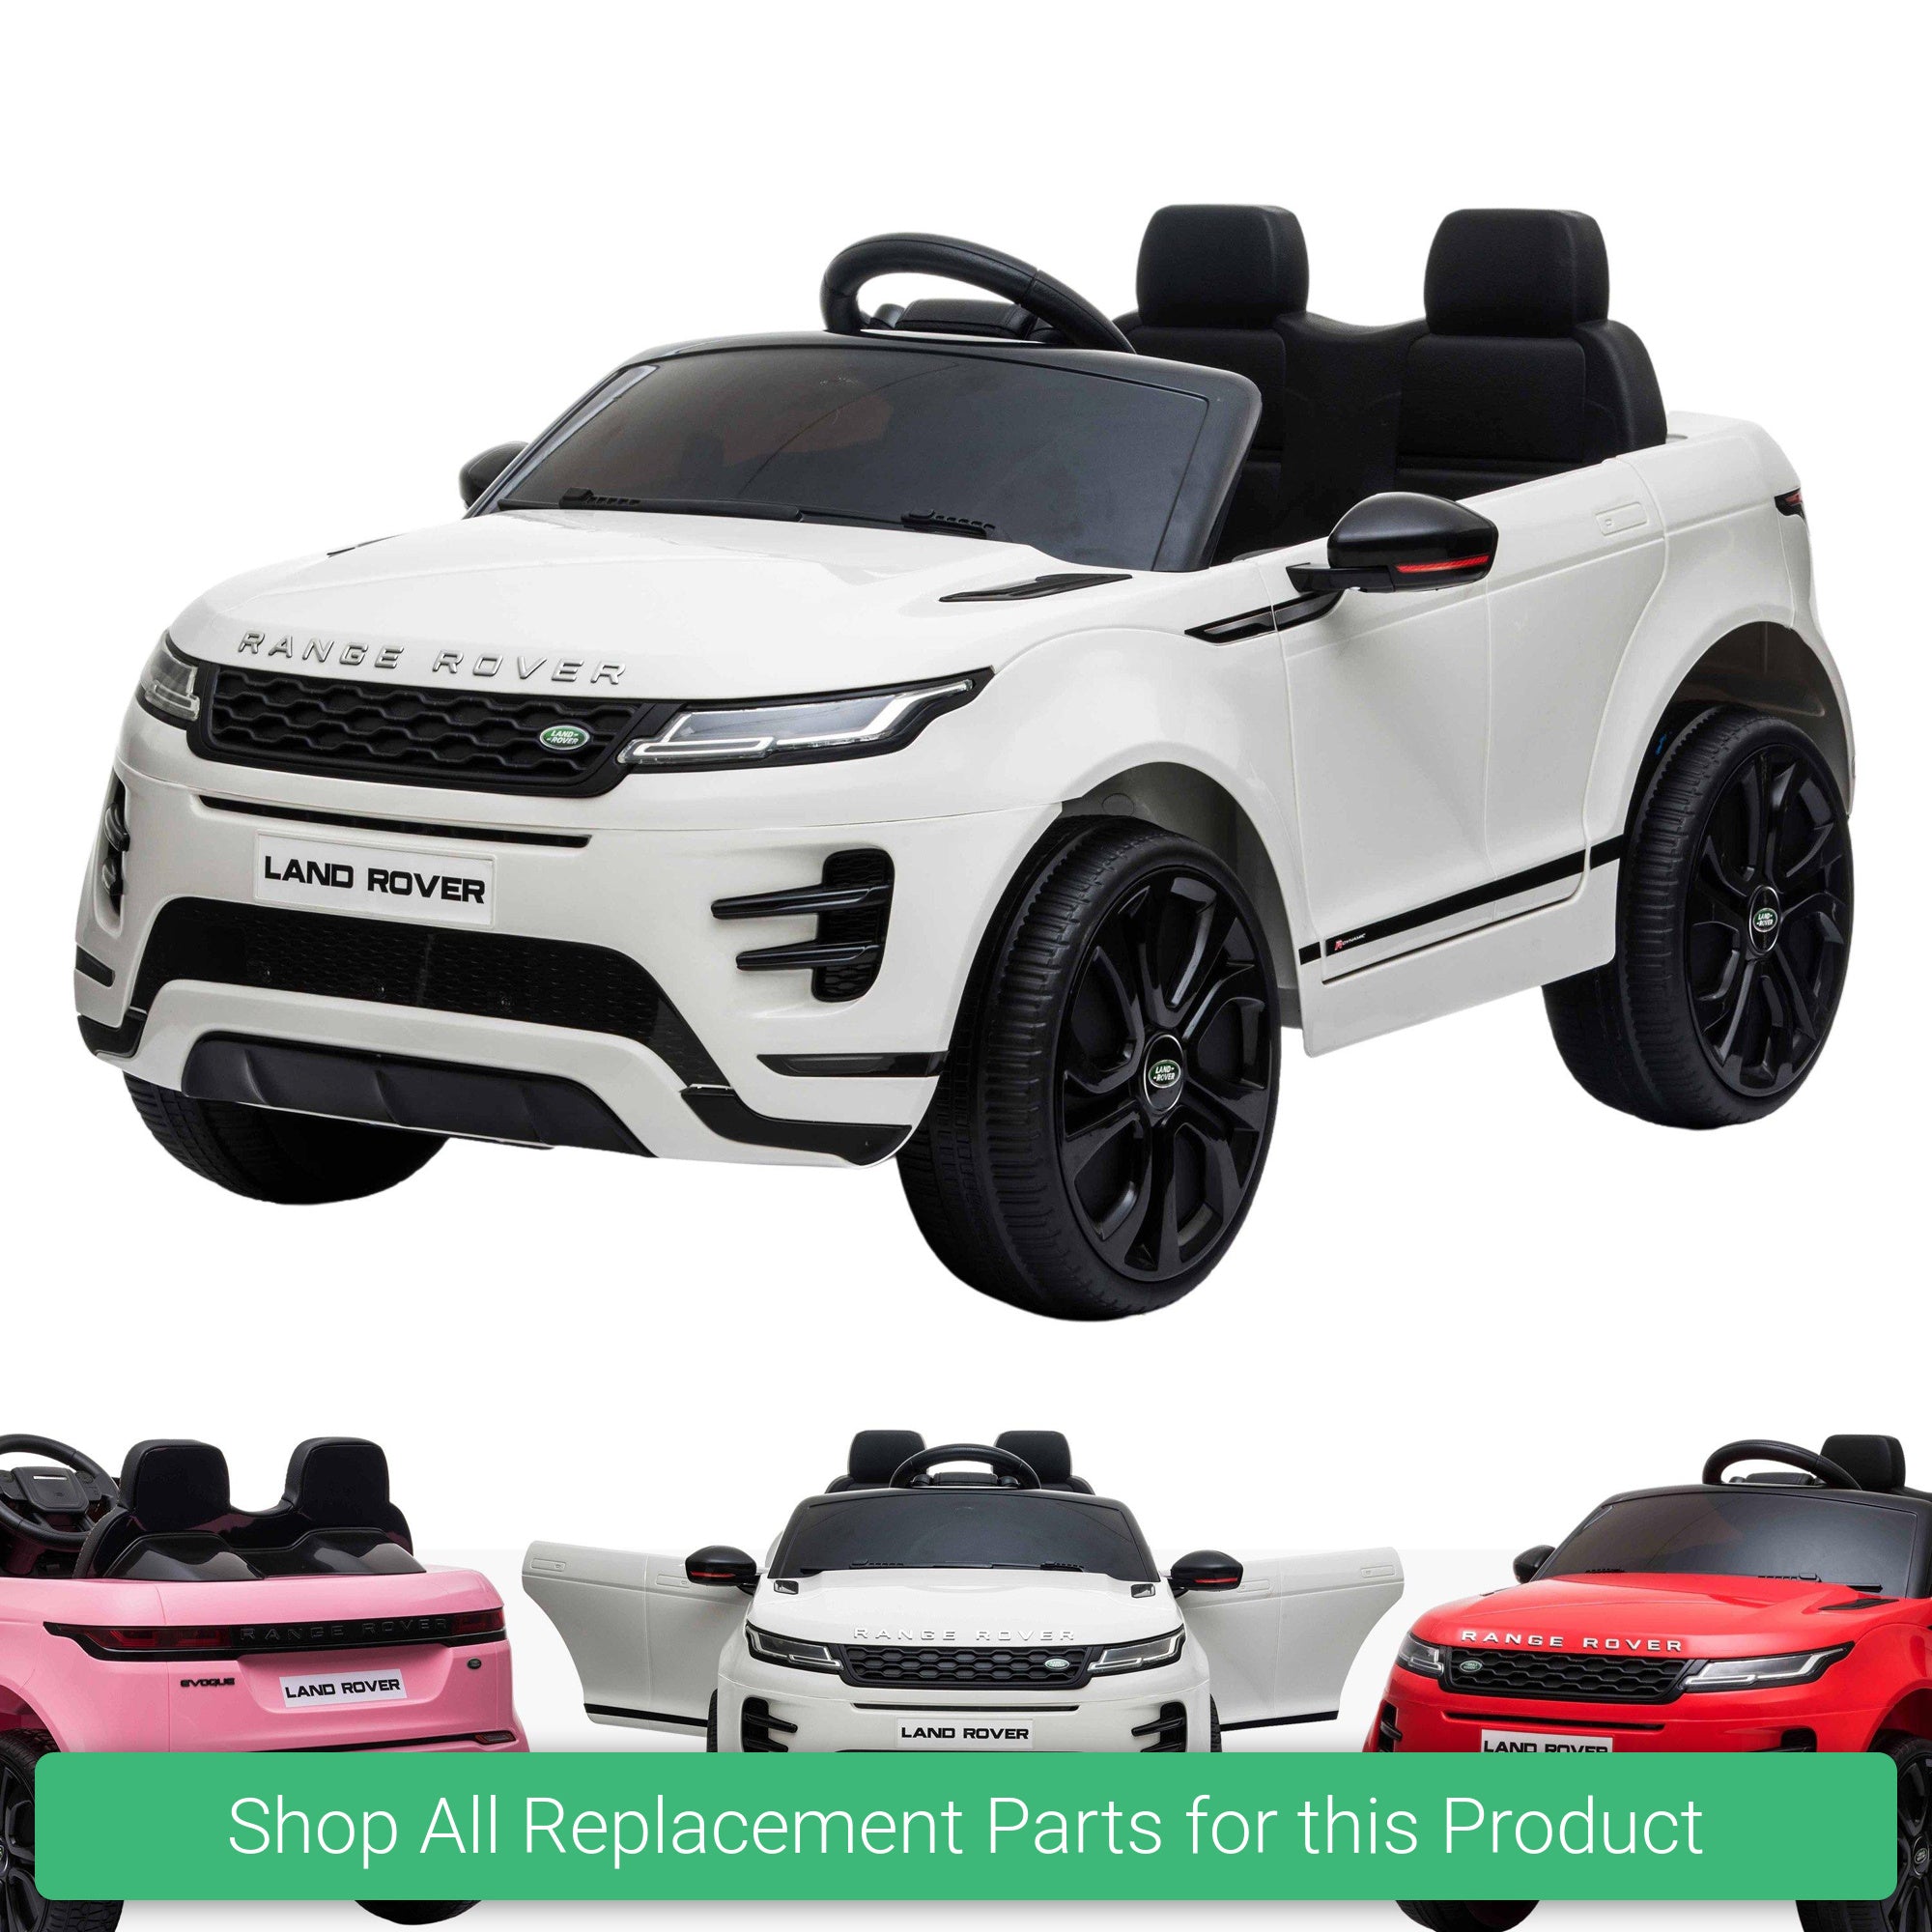 Replacement Parts and Spares for Kids Range Rover Evoque - EVOGUE-VARI - DK-RRE99